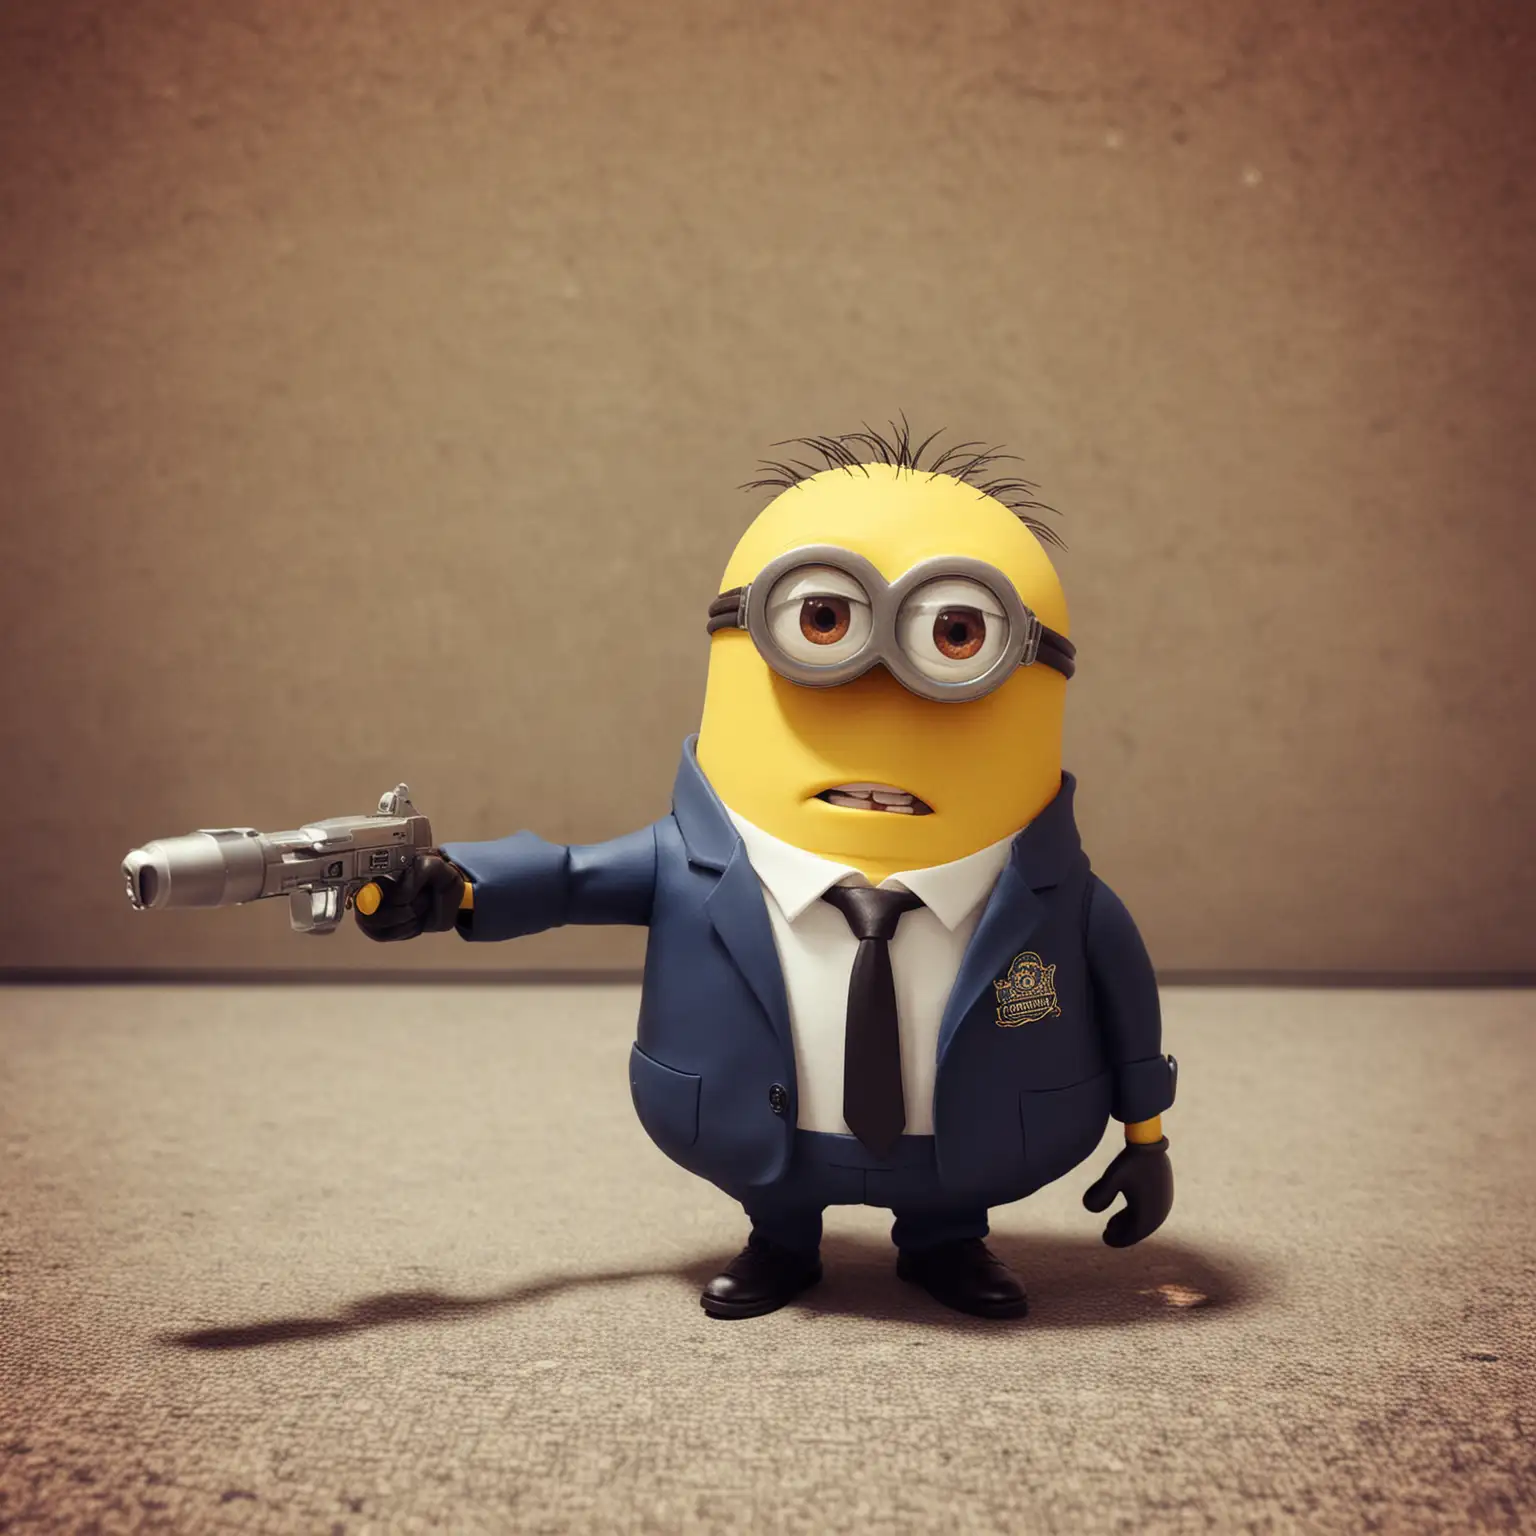 Kevin the minion beating up a FBI agent